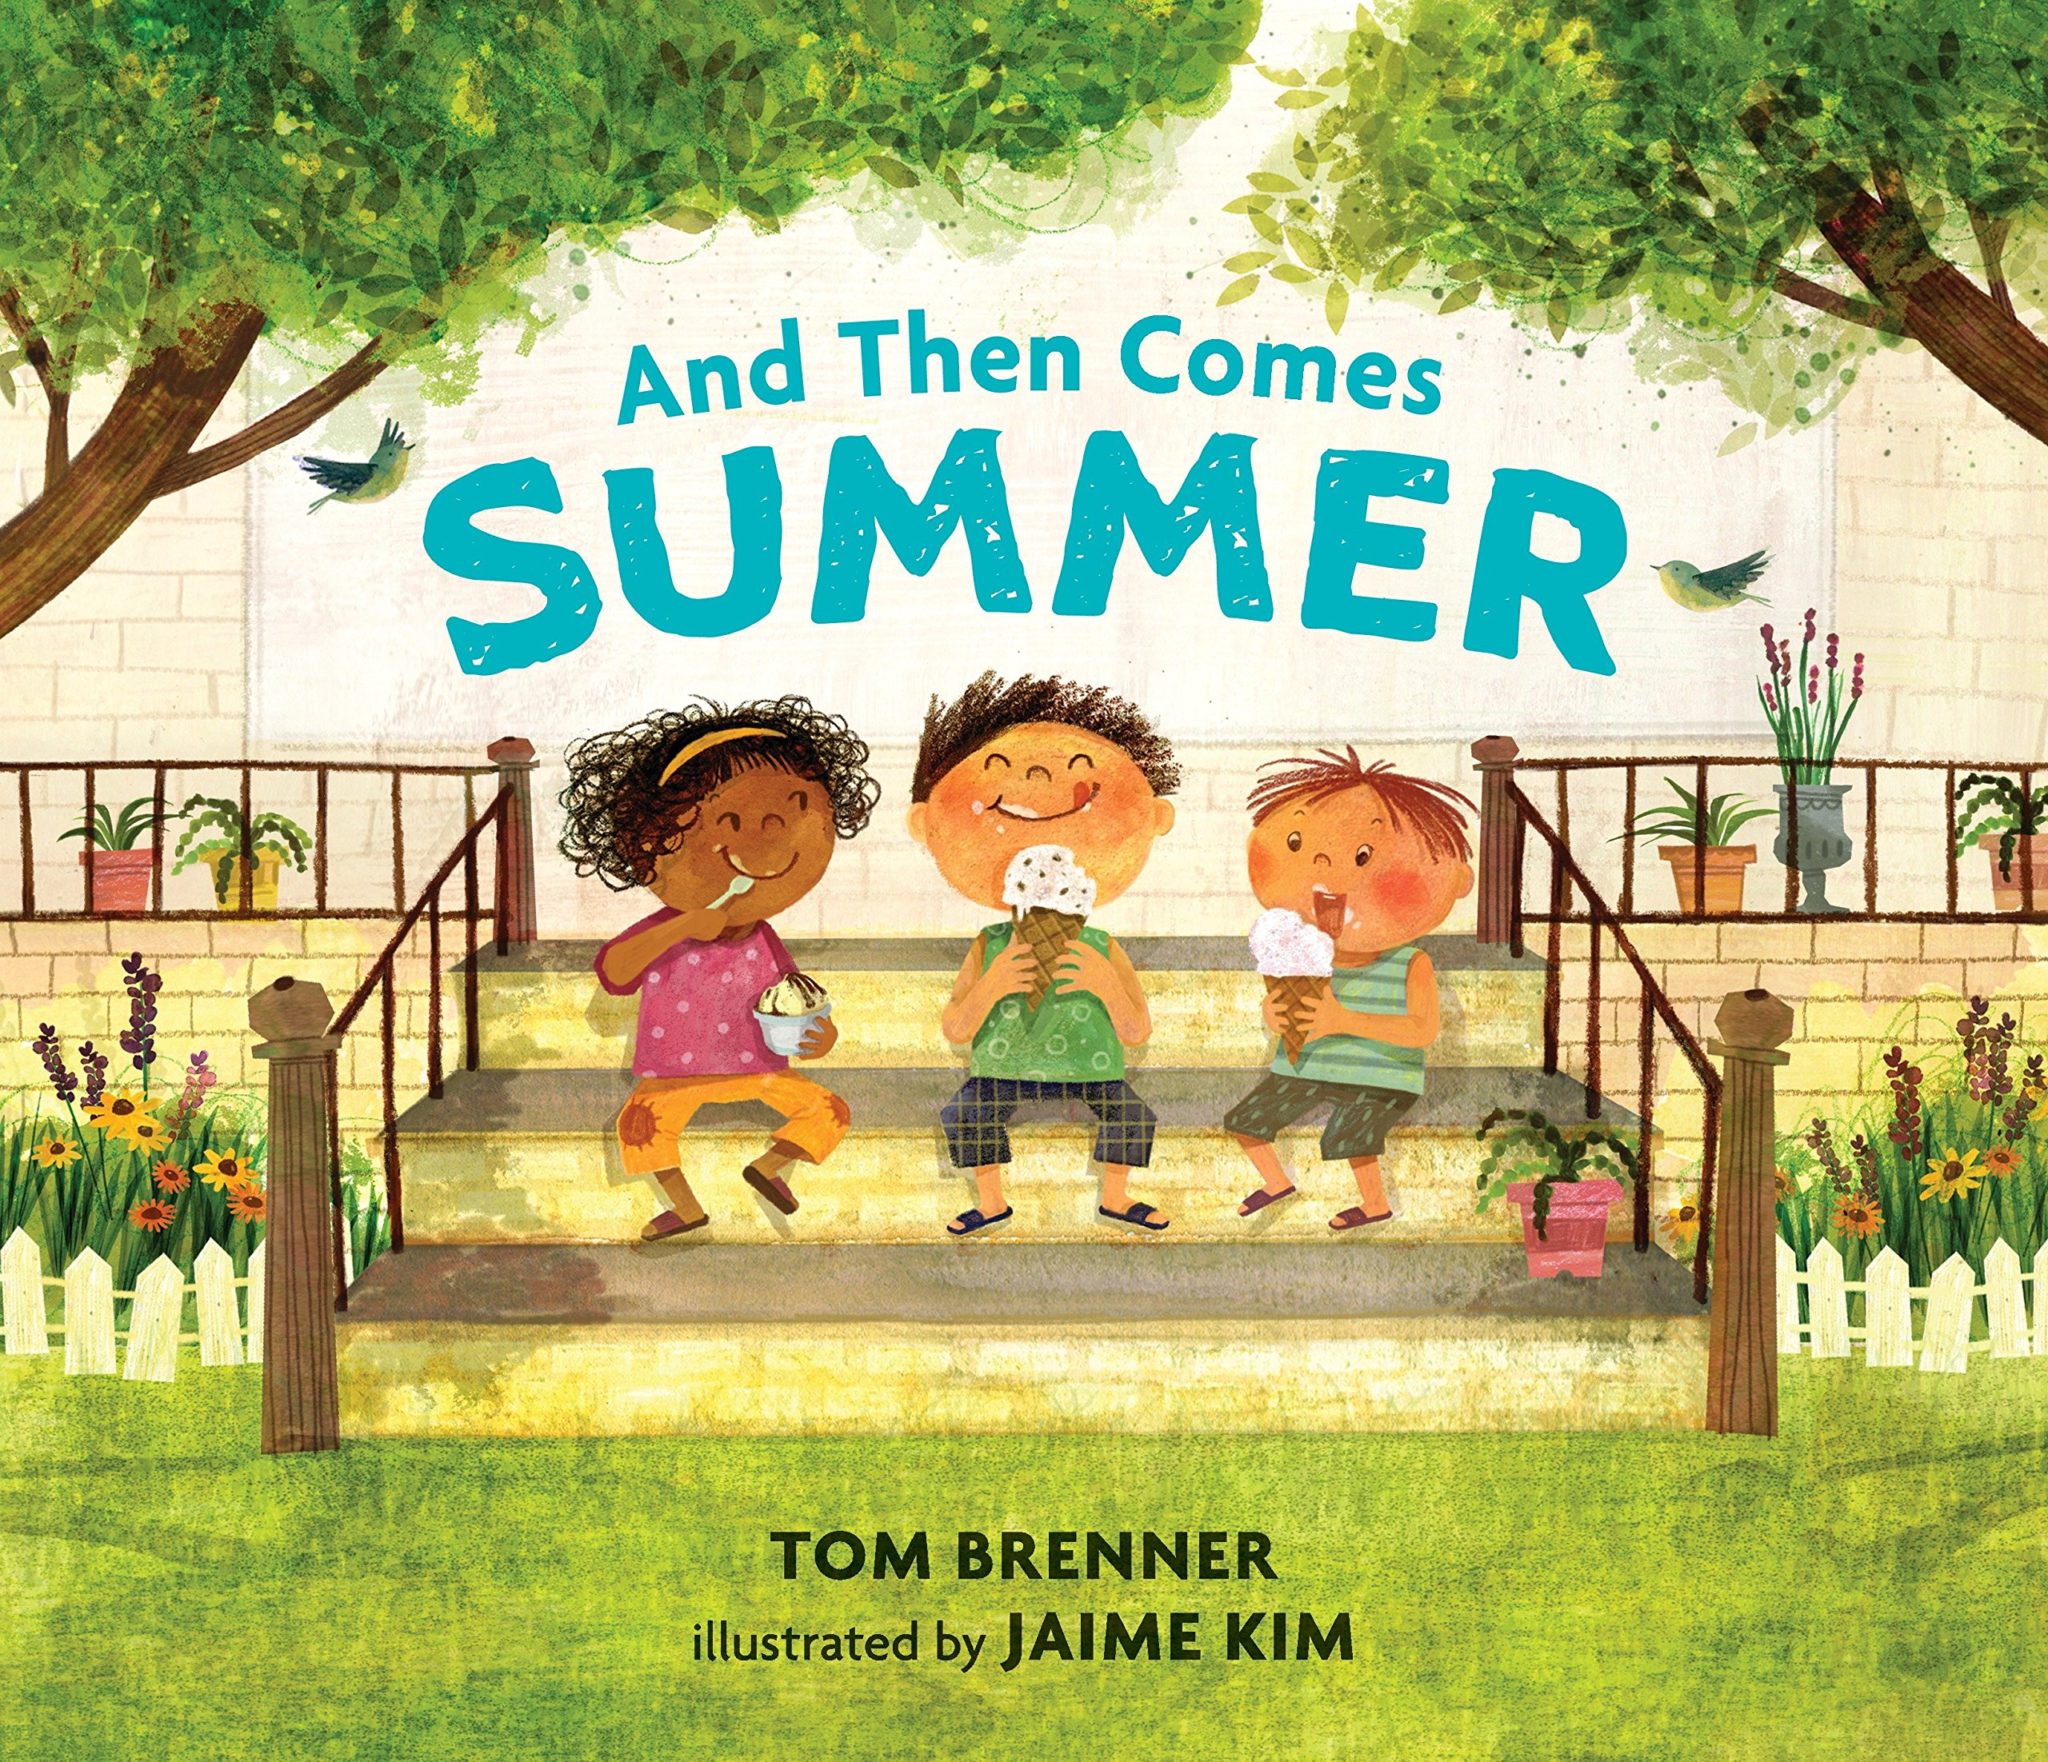 "And Then Comes Summer" by Tom Brenner book cover